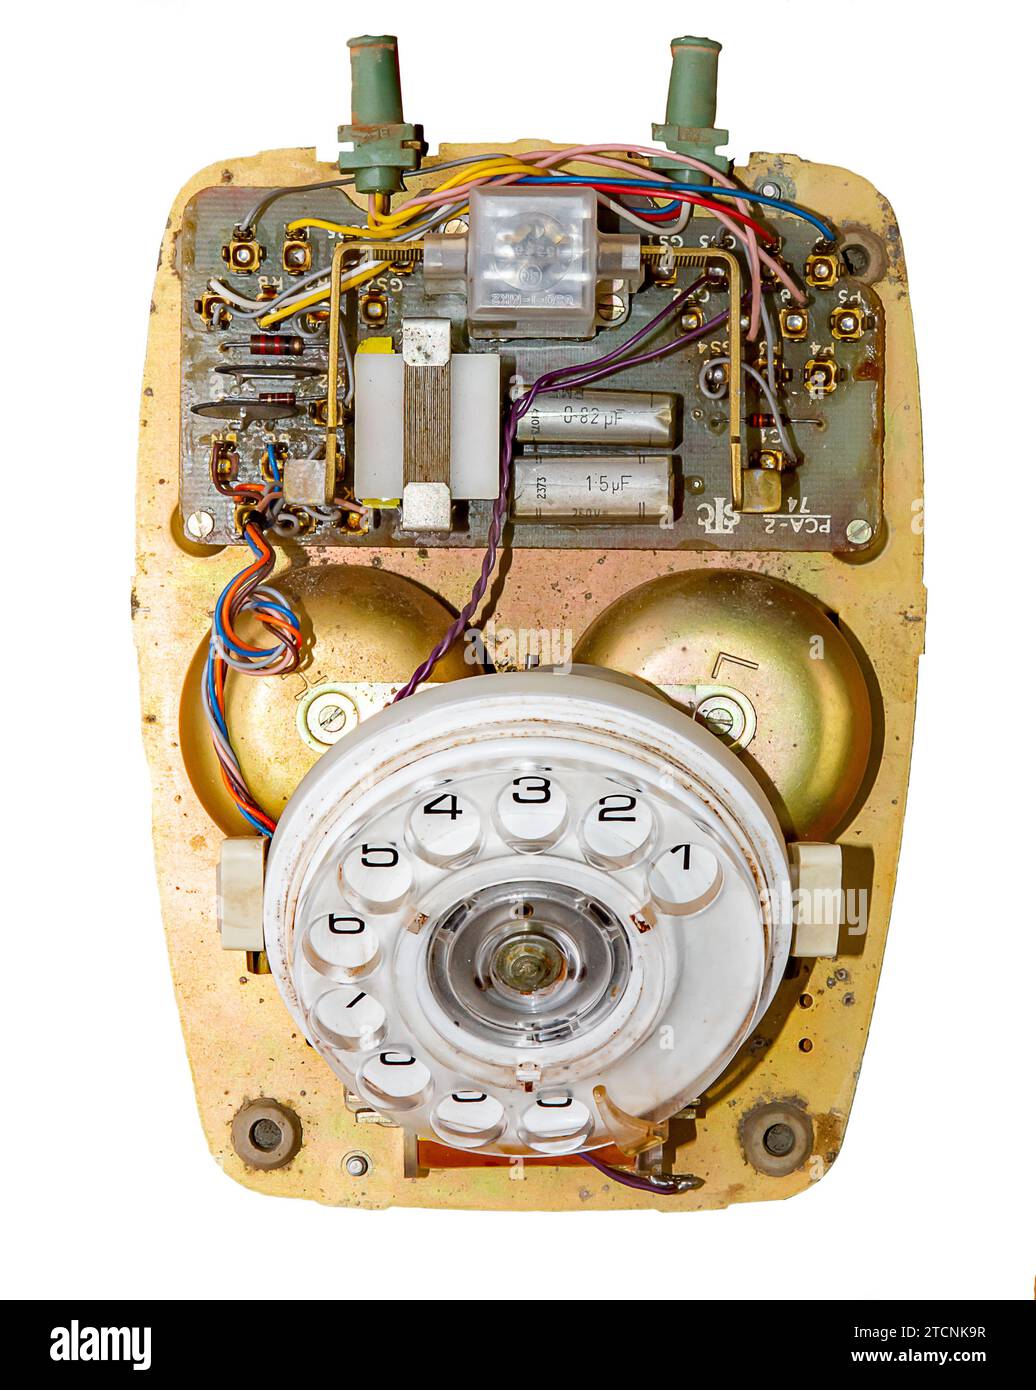 The Inside of a Rotary Phone from 1969 : r/mildlyinteresting